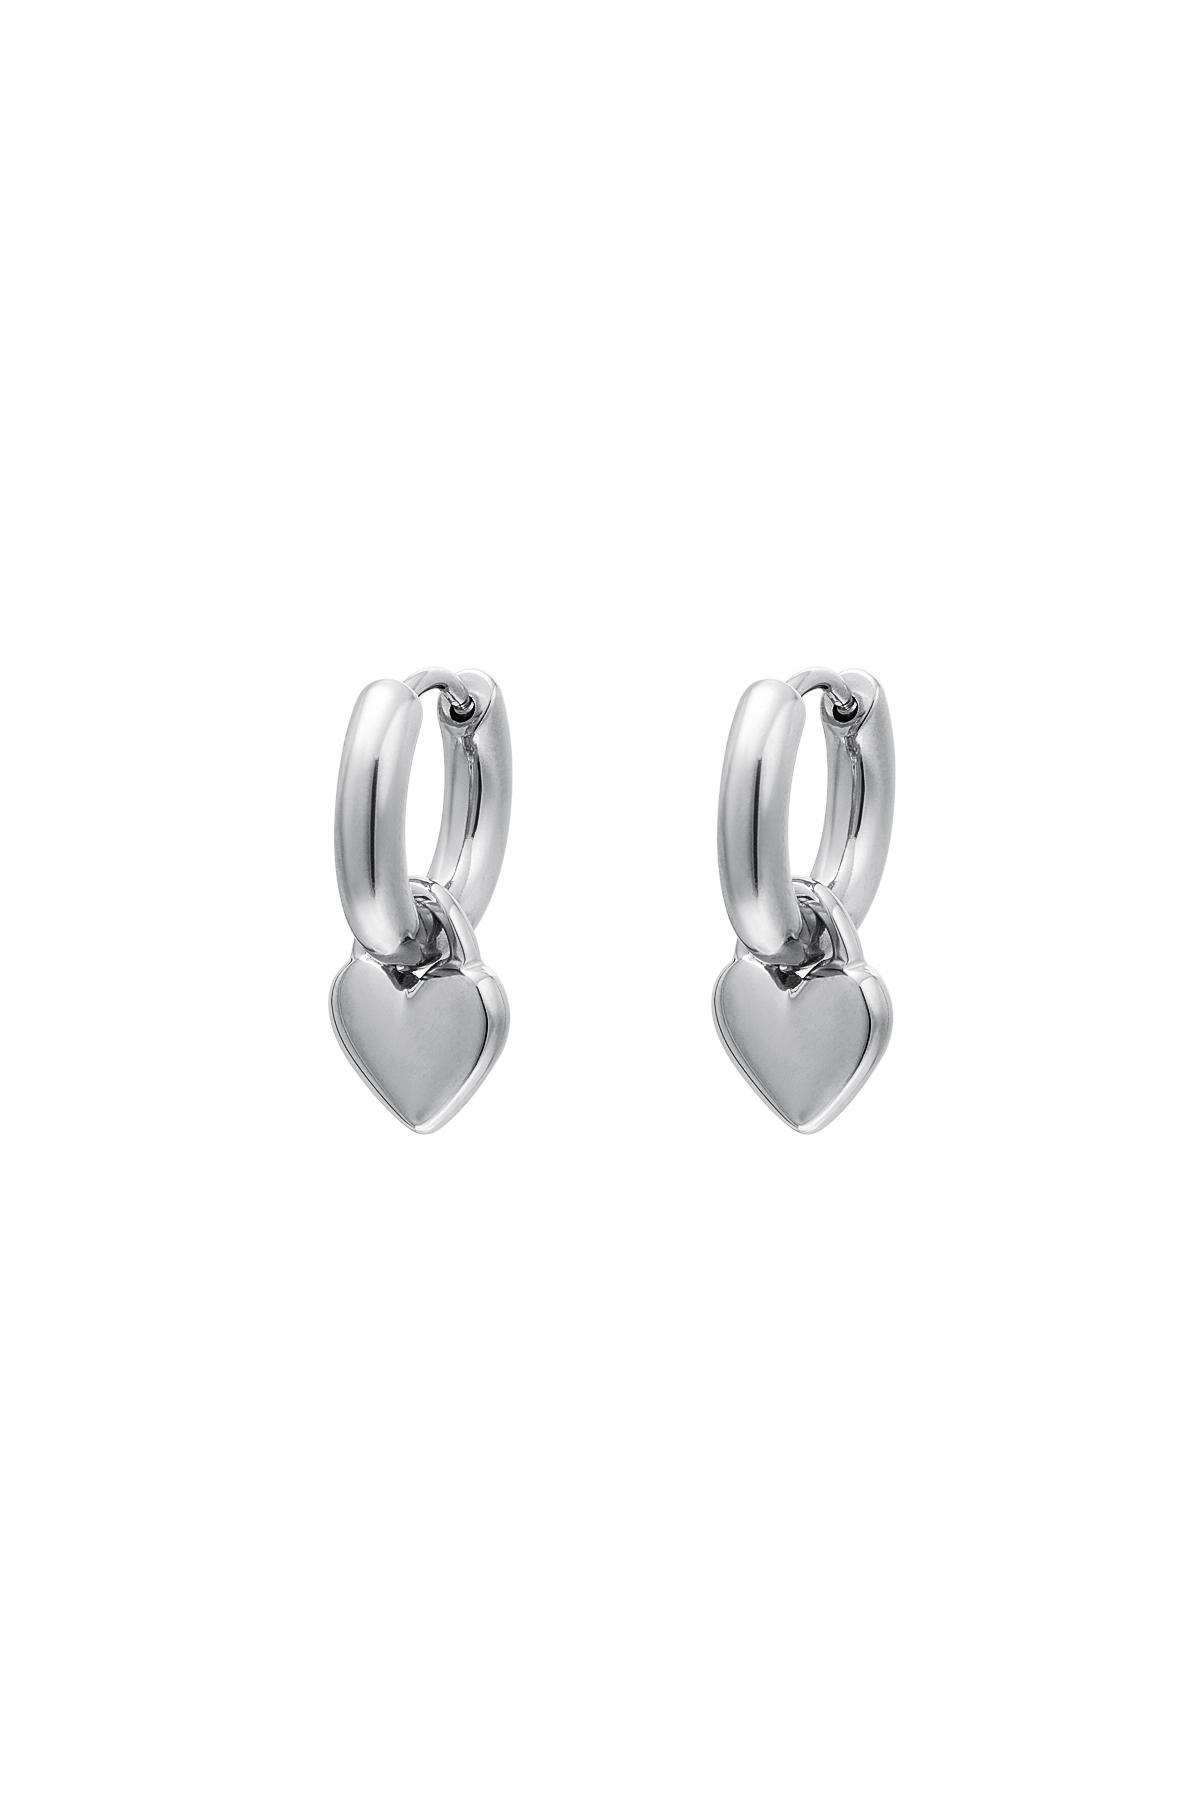 orecchini a cuore Silver Stainless Steel h5 